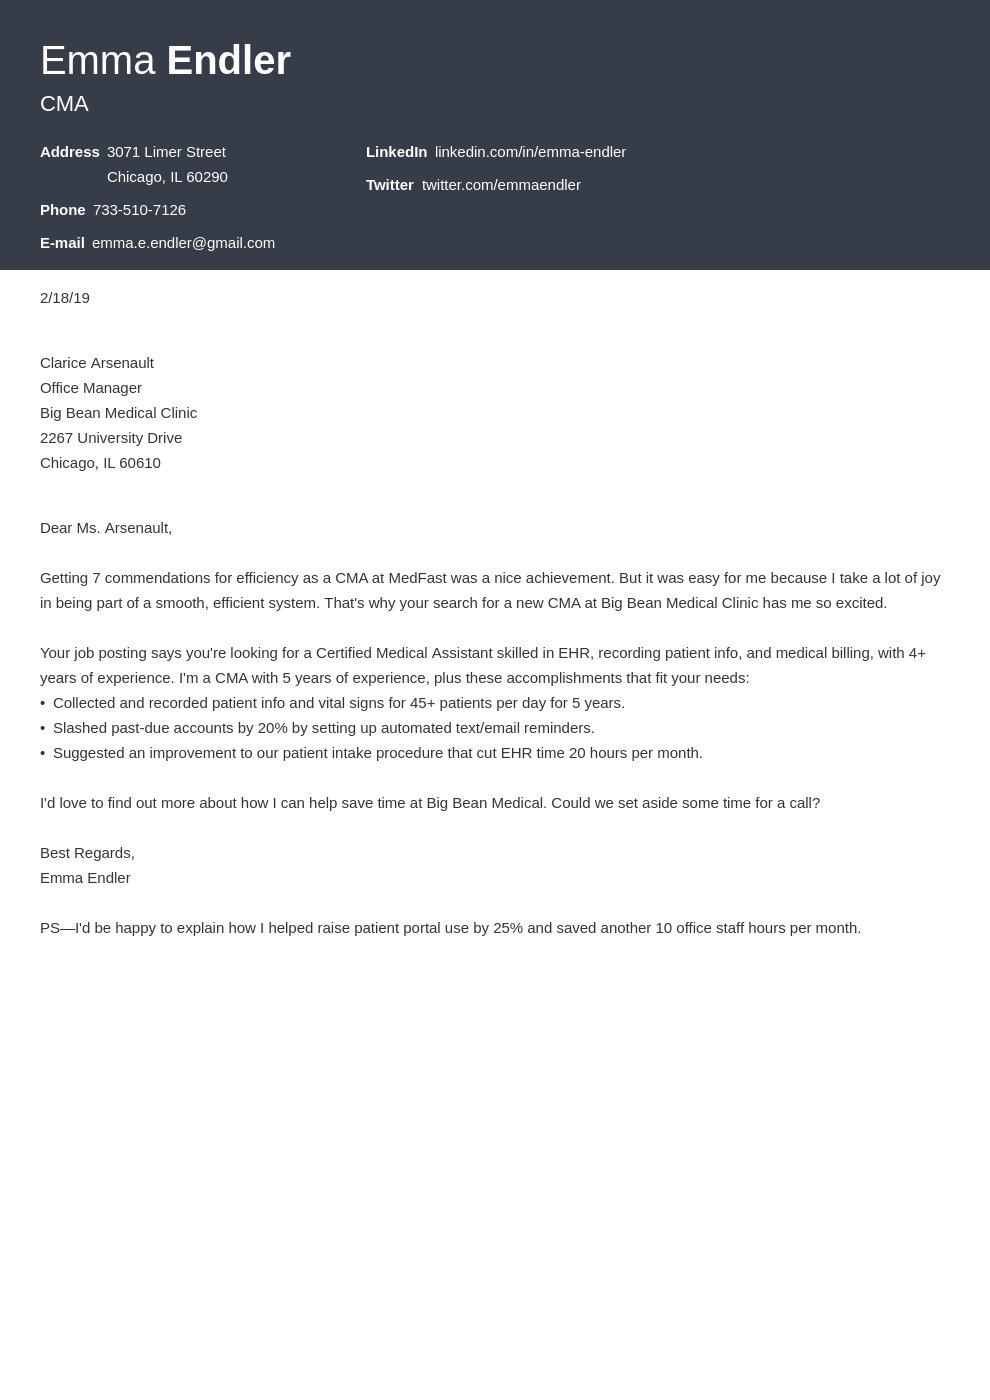 Short Cover Letter Email Sample : Wondering how to write a cover letter